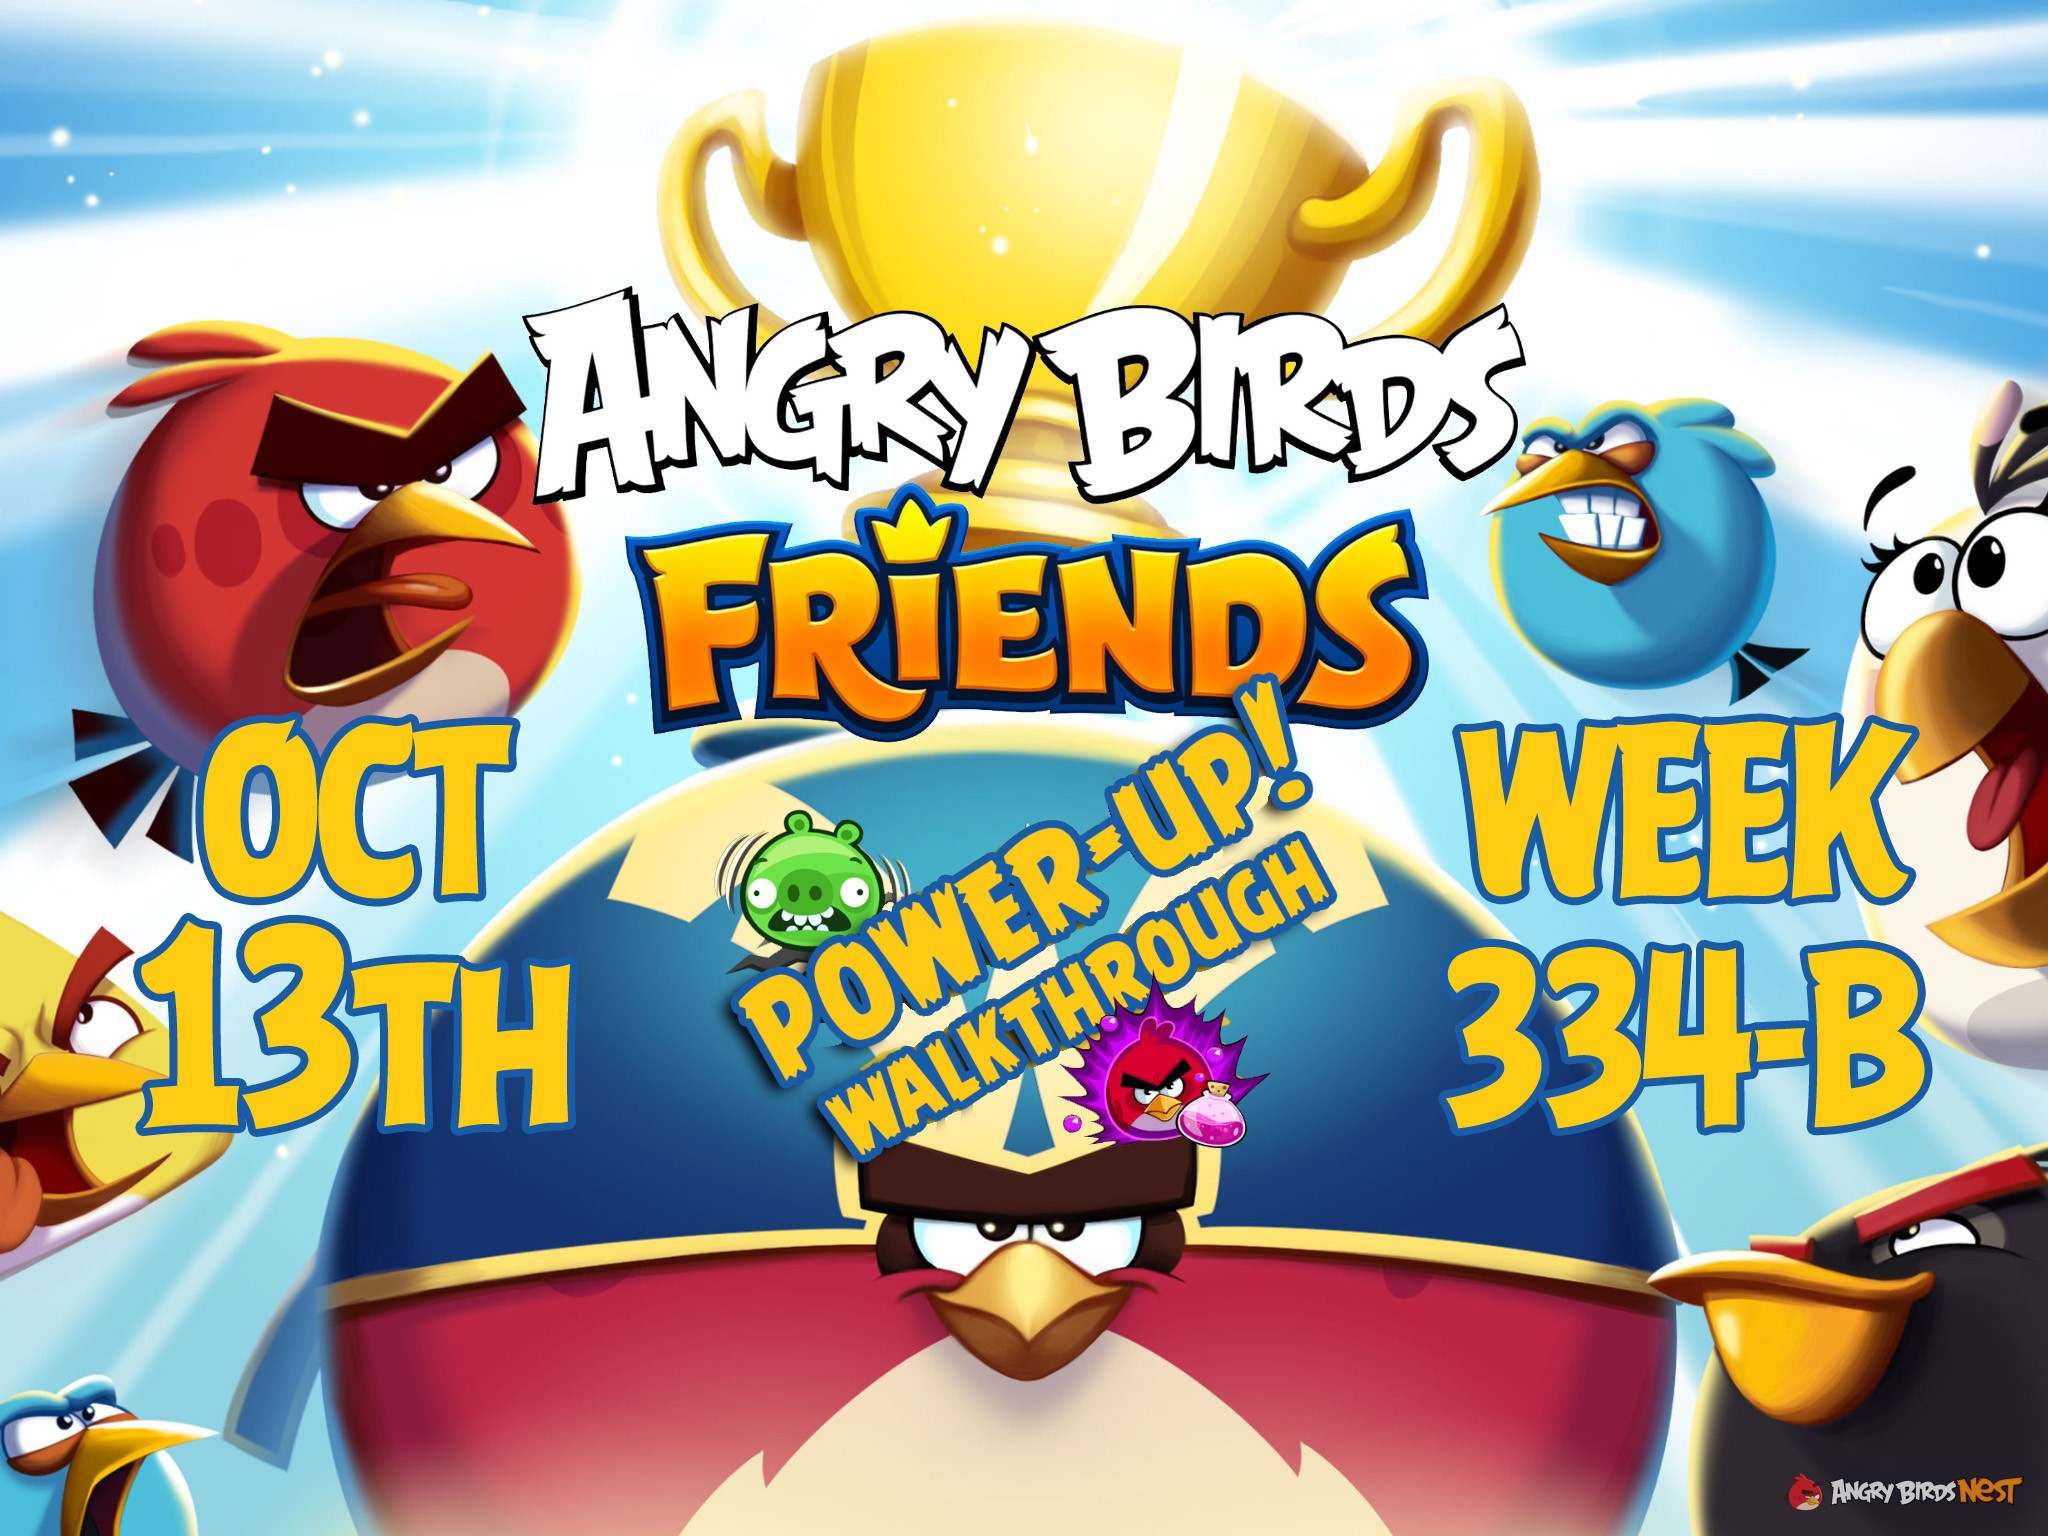 Angry-Birds-Friends-Tournament-Week-334-B-Feature-Image-PU